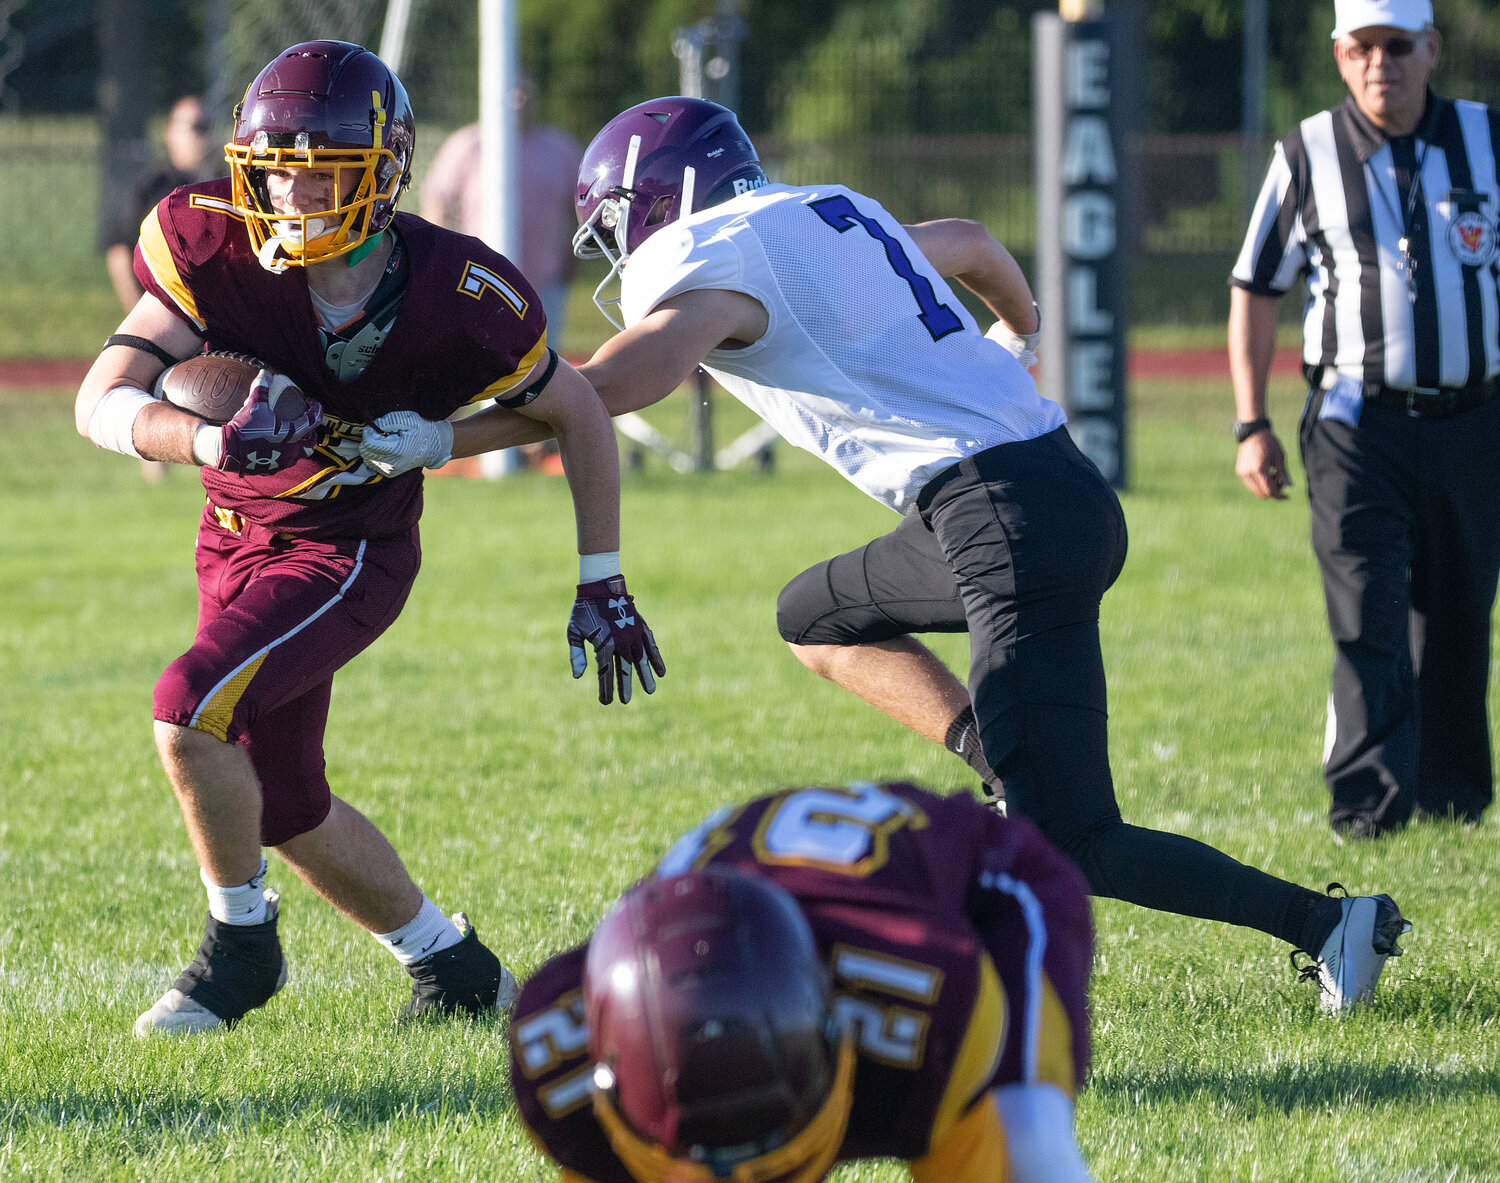 Running back Aiden Champ runs by a Huskies defender during an outside run during the Tigers' loss to Mt. Hope in the annual injury fund game in Barrington on Thursday.